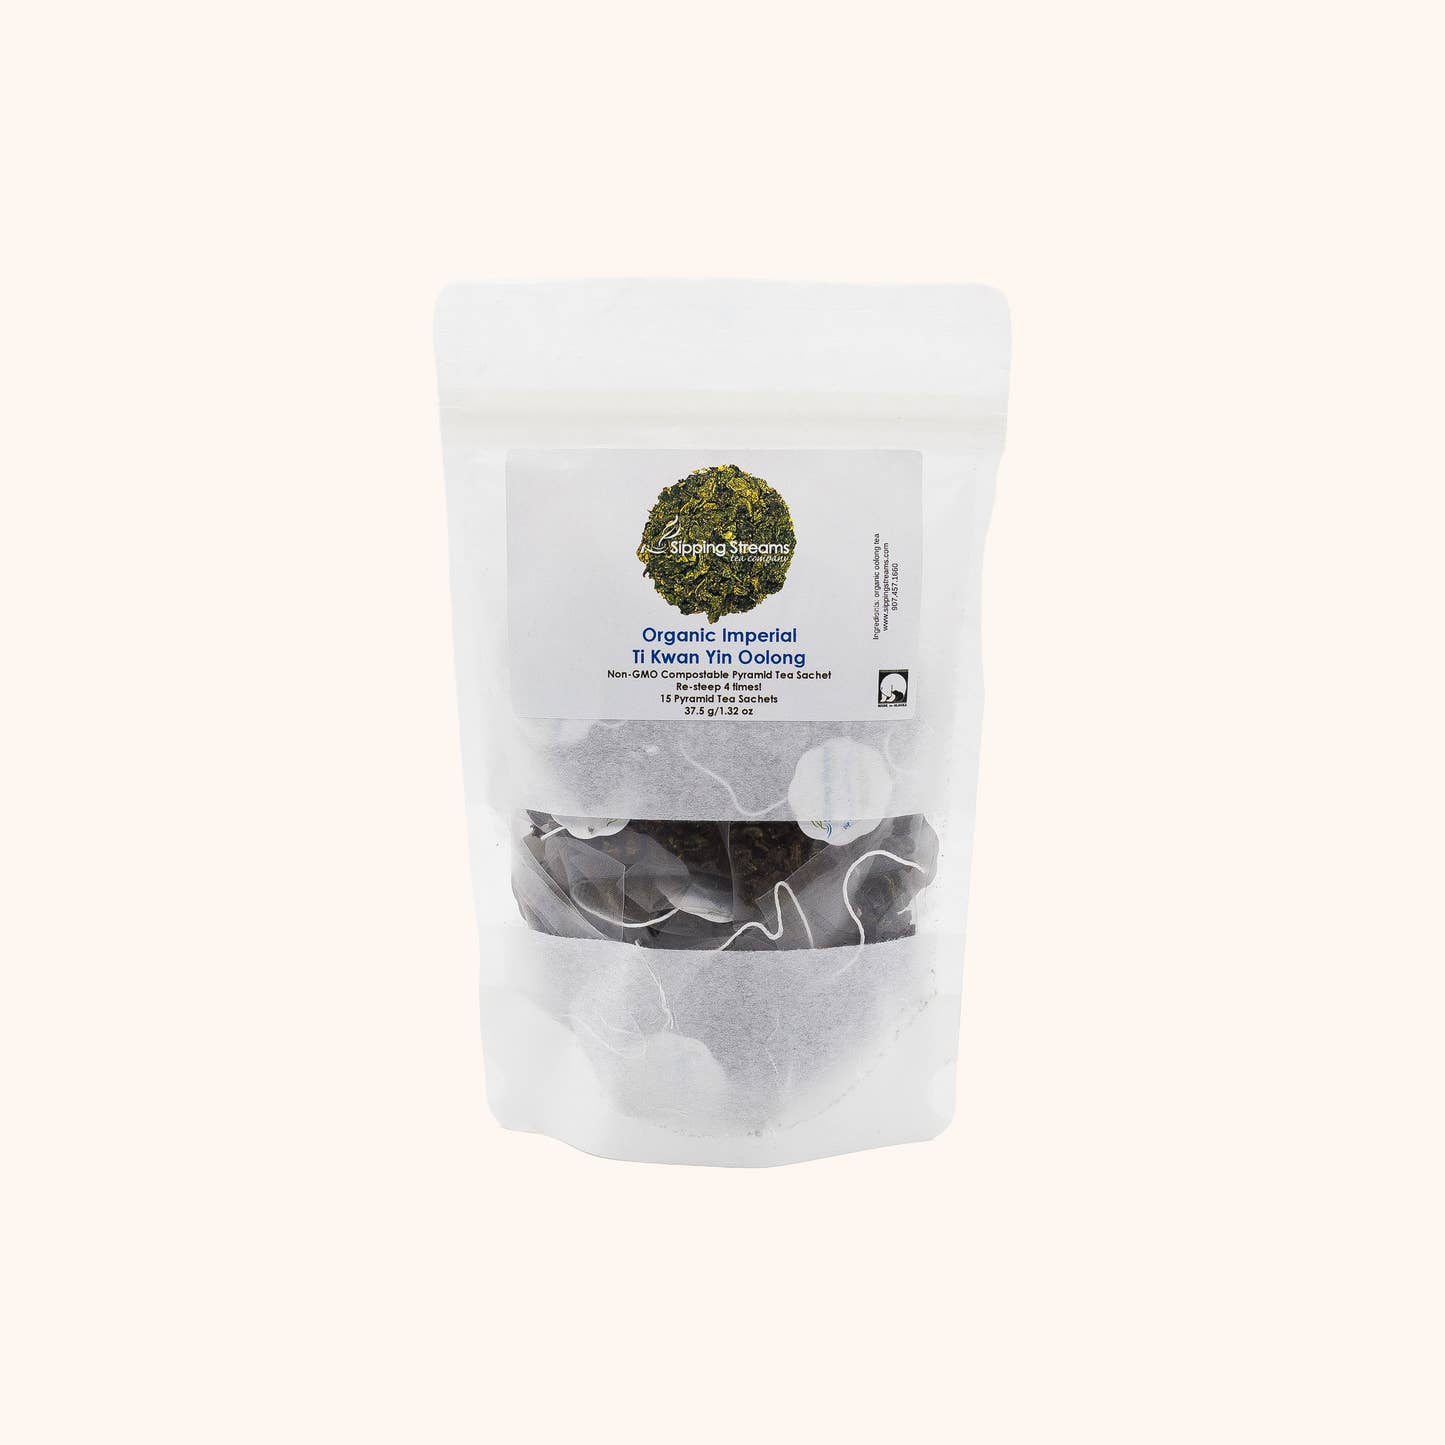 Organic Imperial Ti Kwan Yin by Sipping Streams Tea Company loose leaf oolong tea pyramid sachet pouch